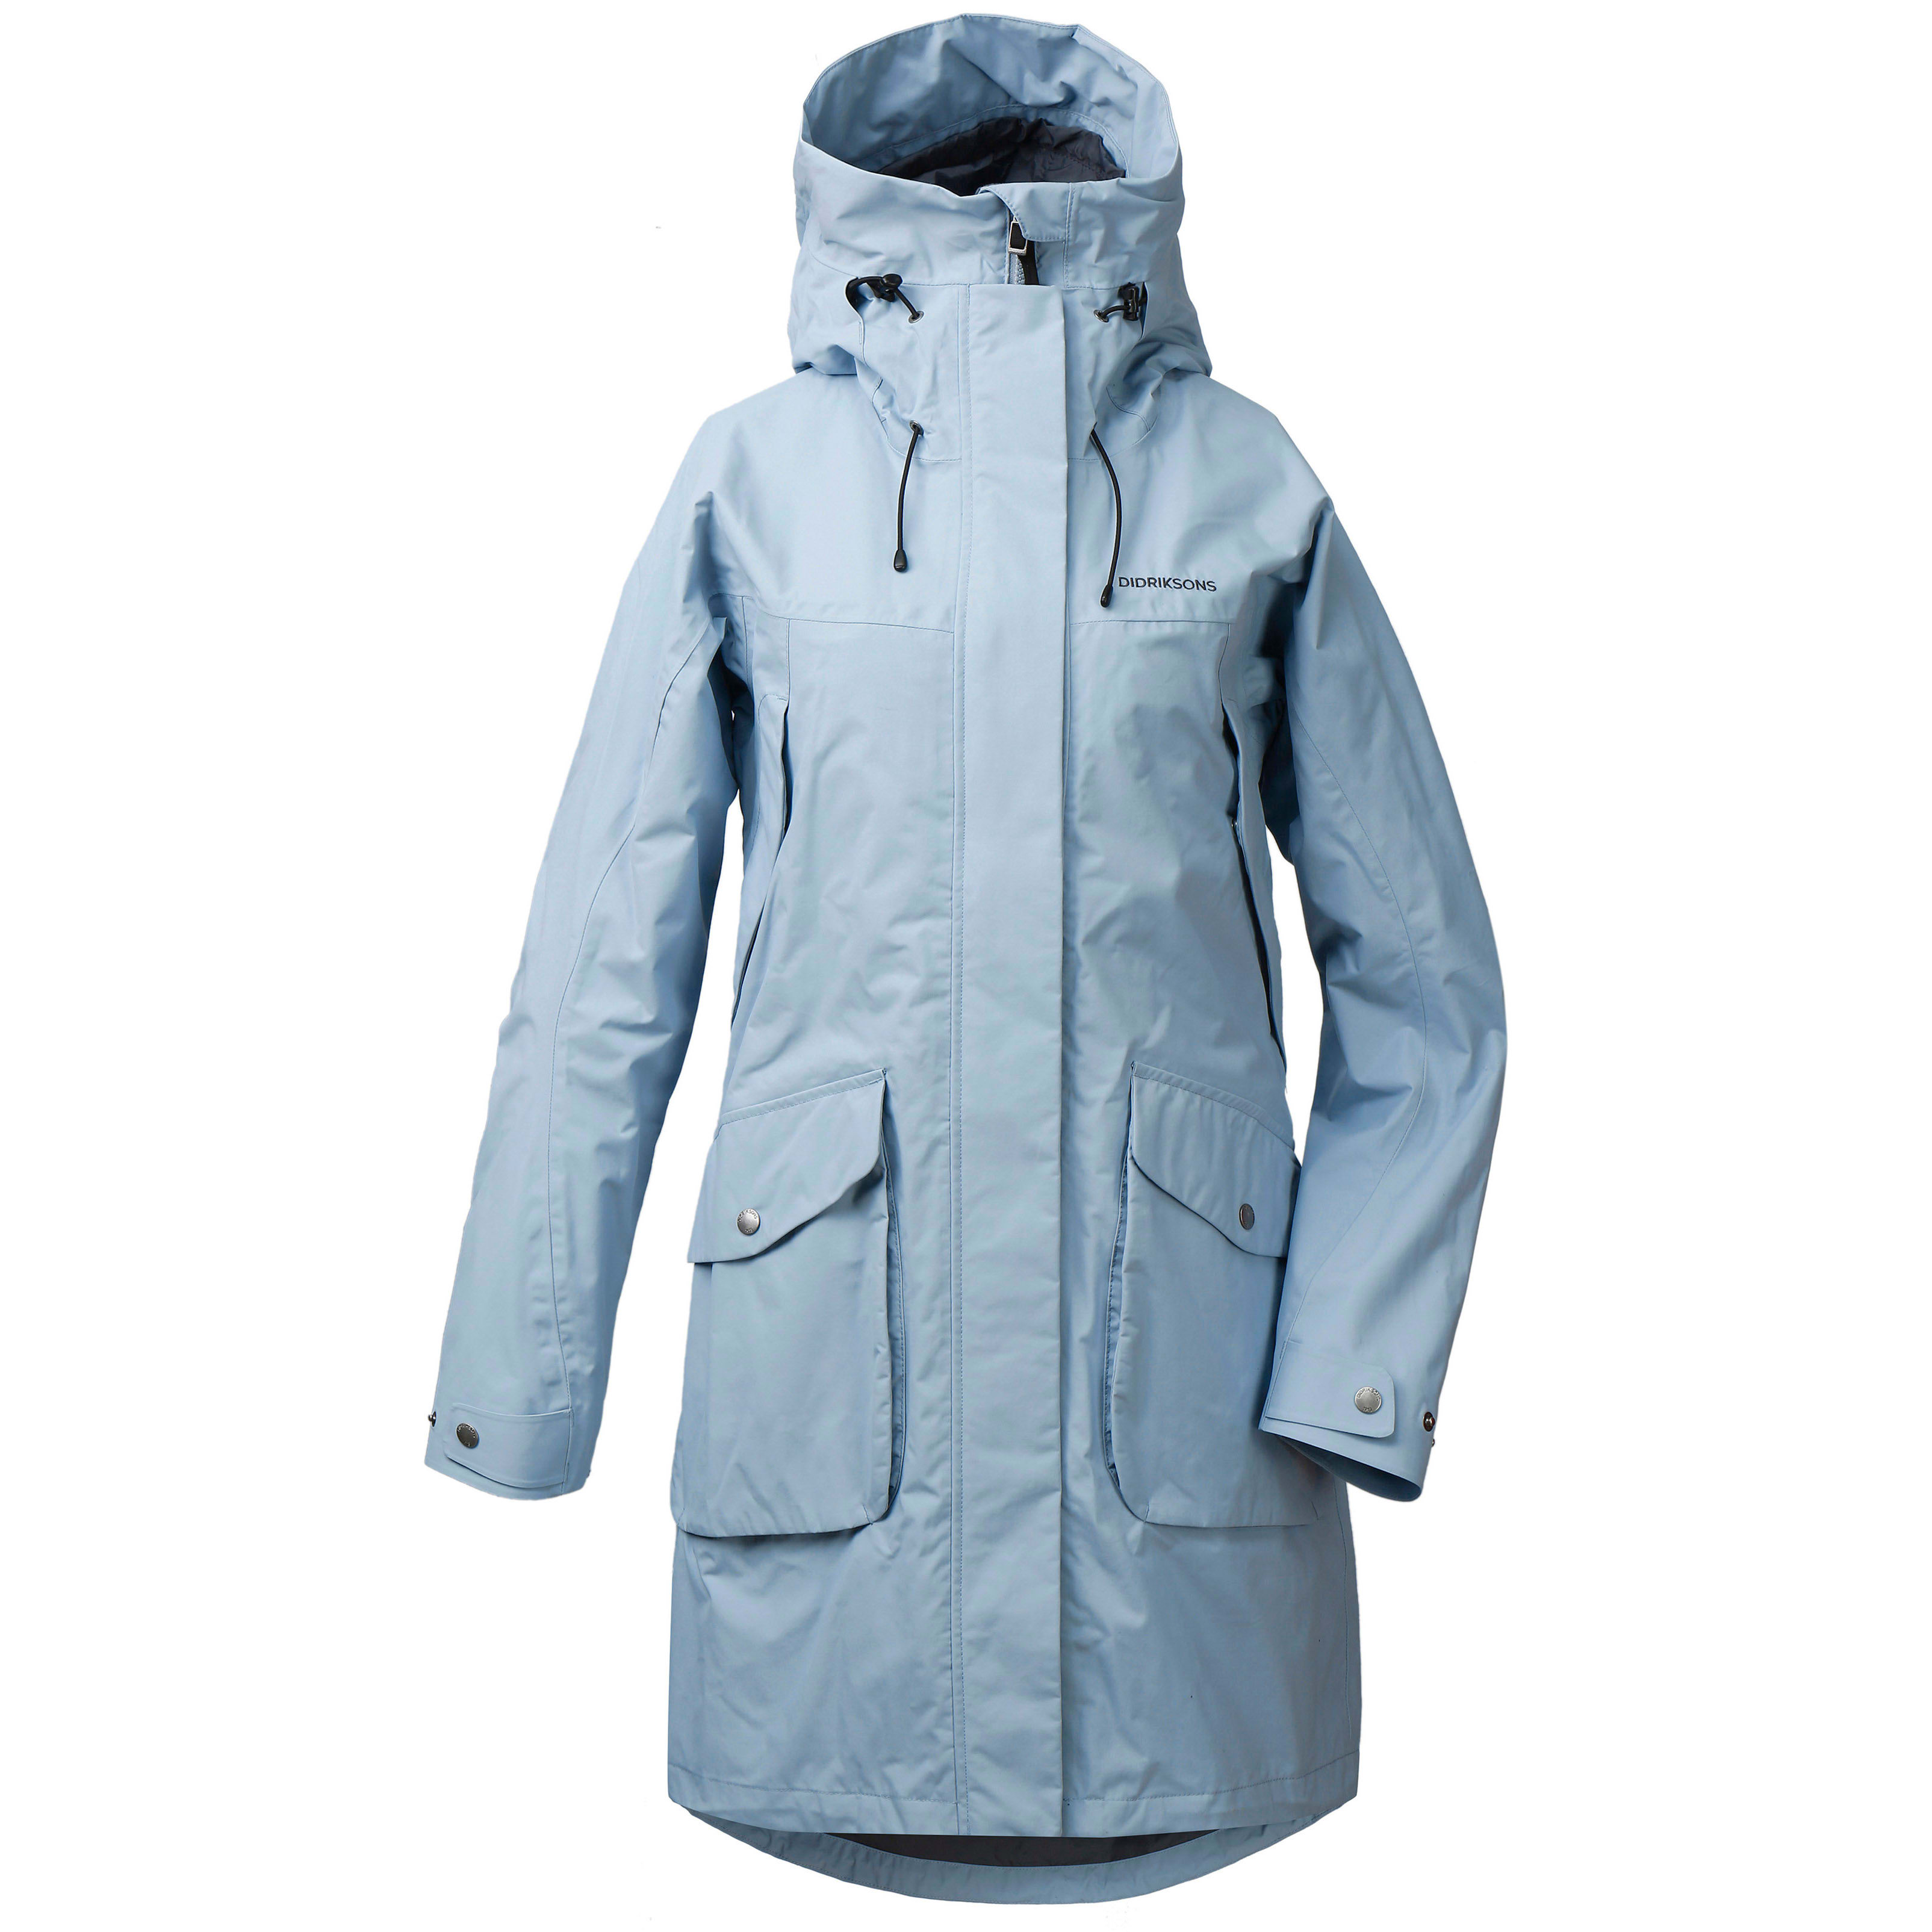 medley ros Bred vifte Kauf Didriksons Thelma Women's Parka 4 bei Outnorth